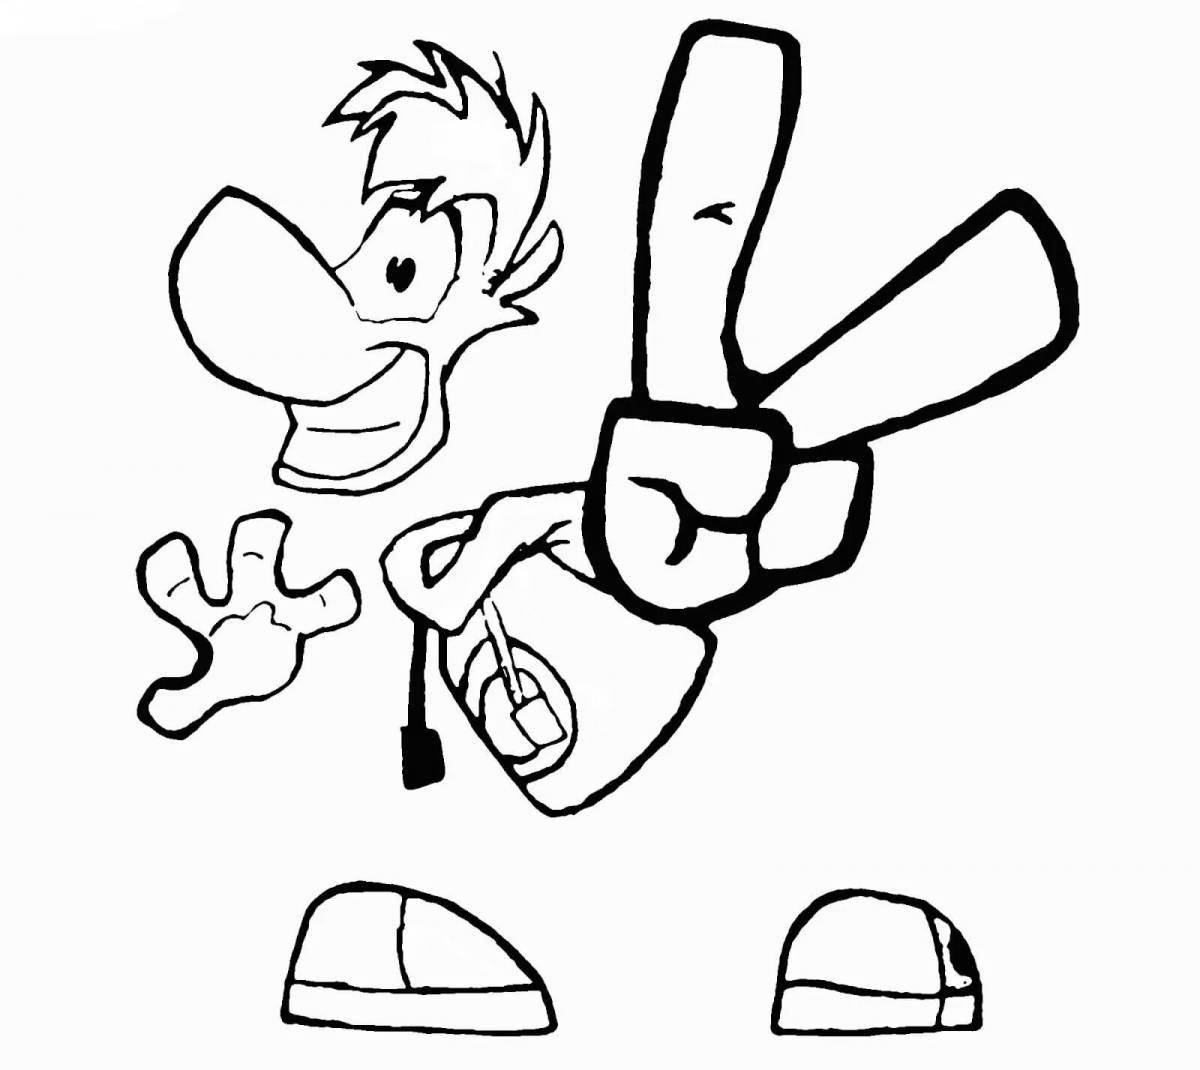 Rayman legends live coloring page